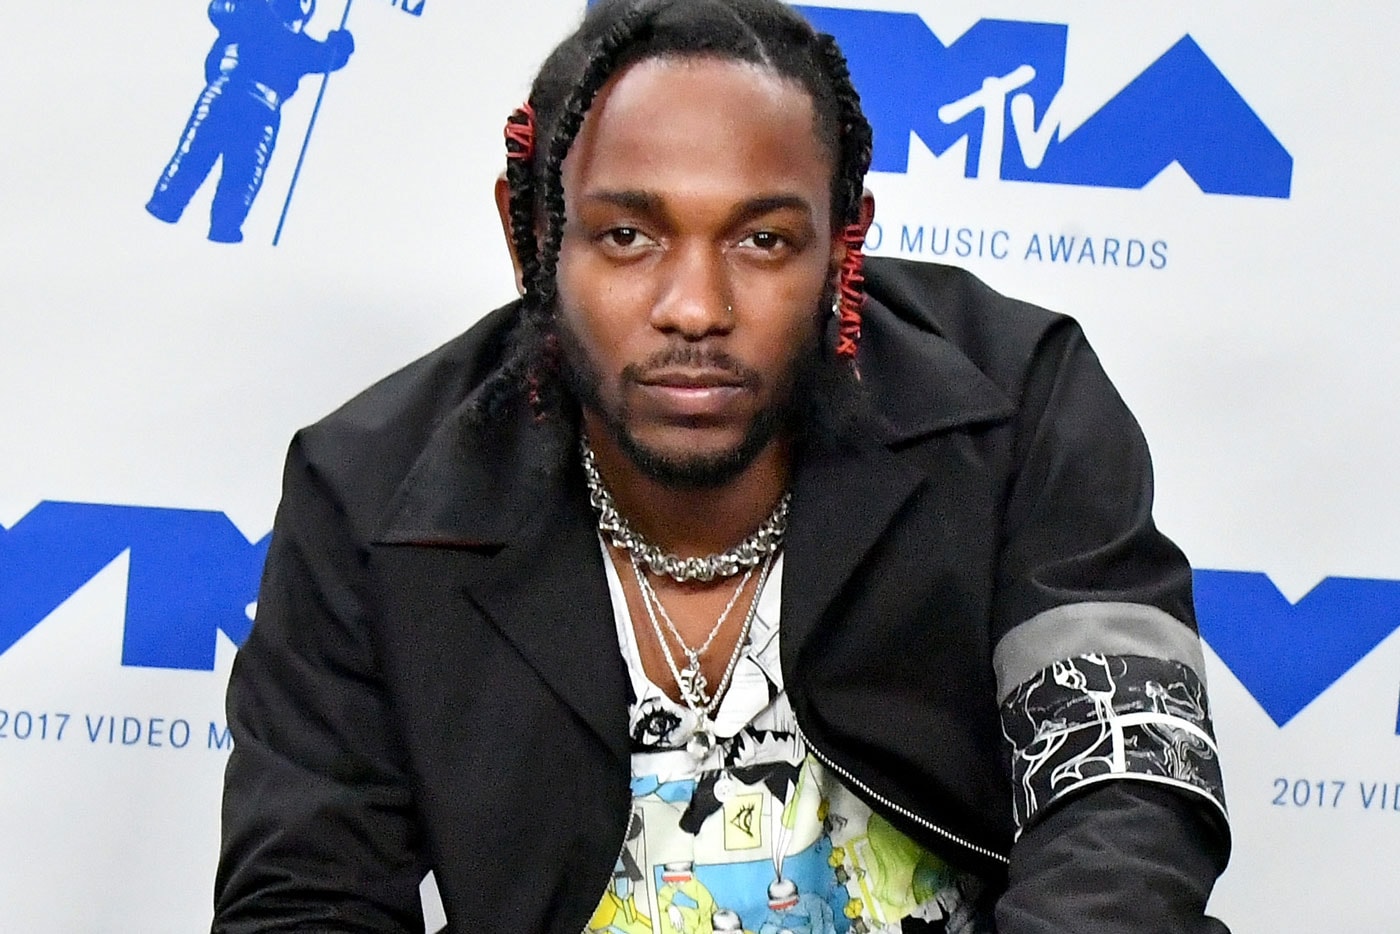 Wale Had Some Words for Kendrick Lamar, So Jay Rock Responded